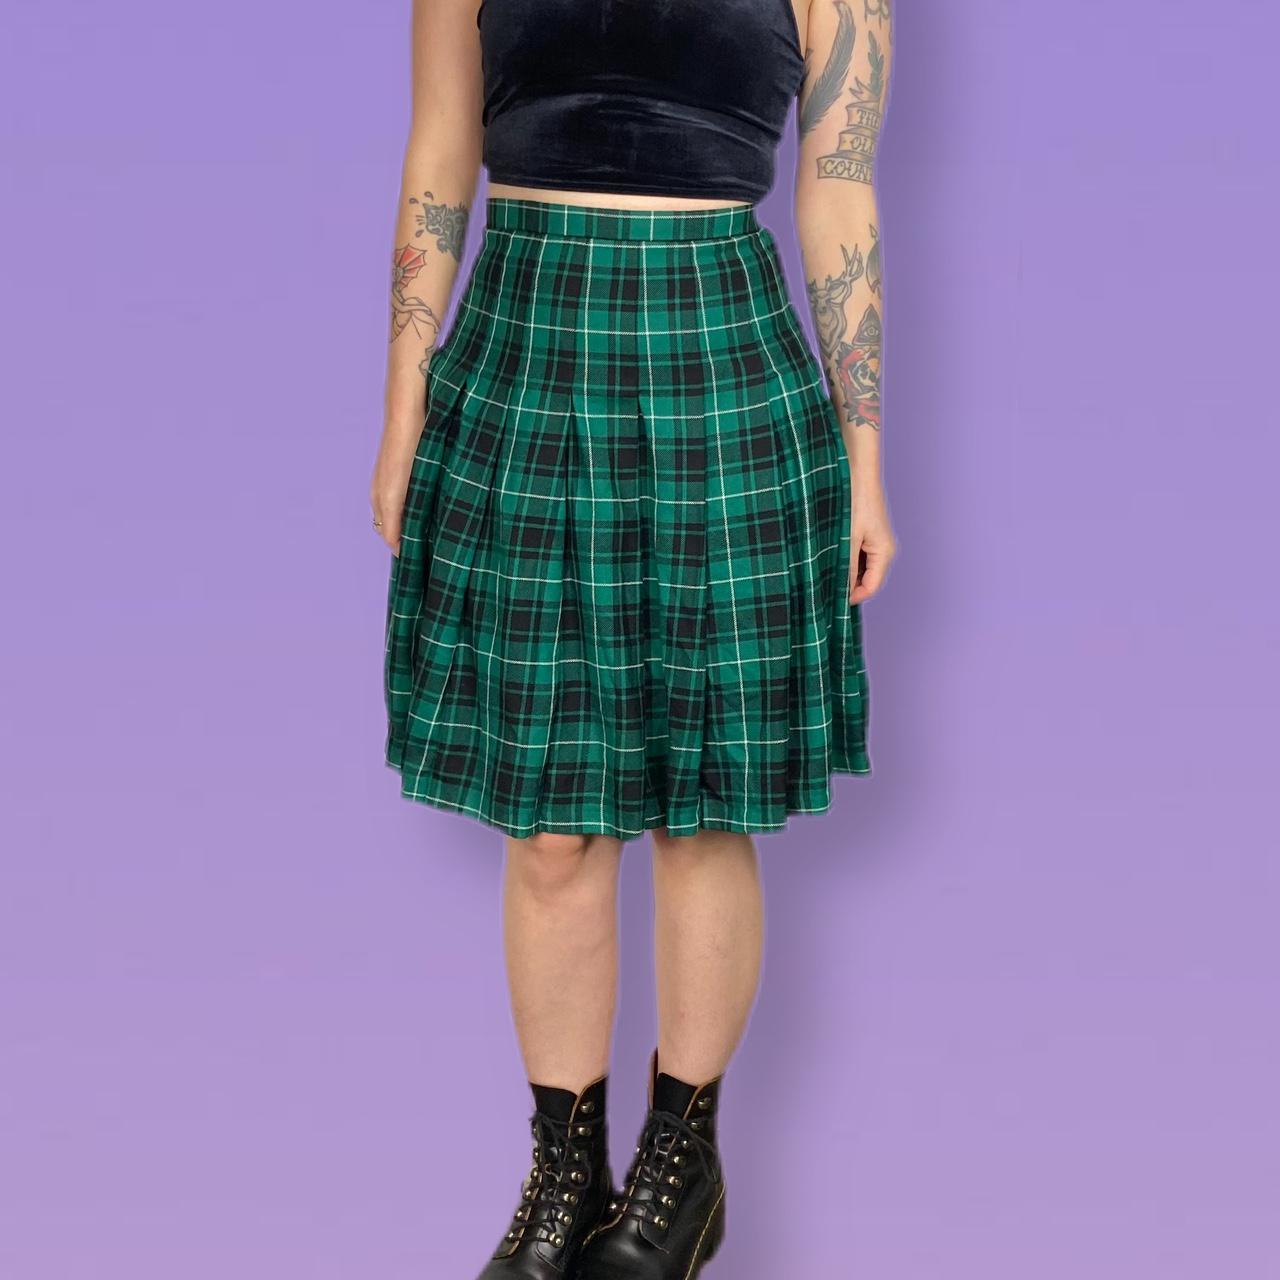 Product Image 2 - Green plaid skirt by Pendleton!